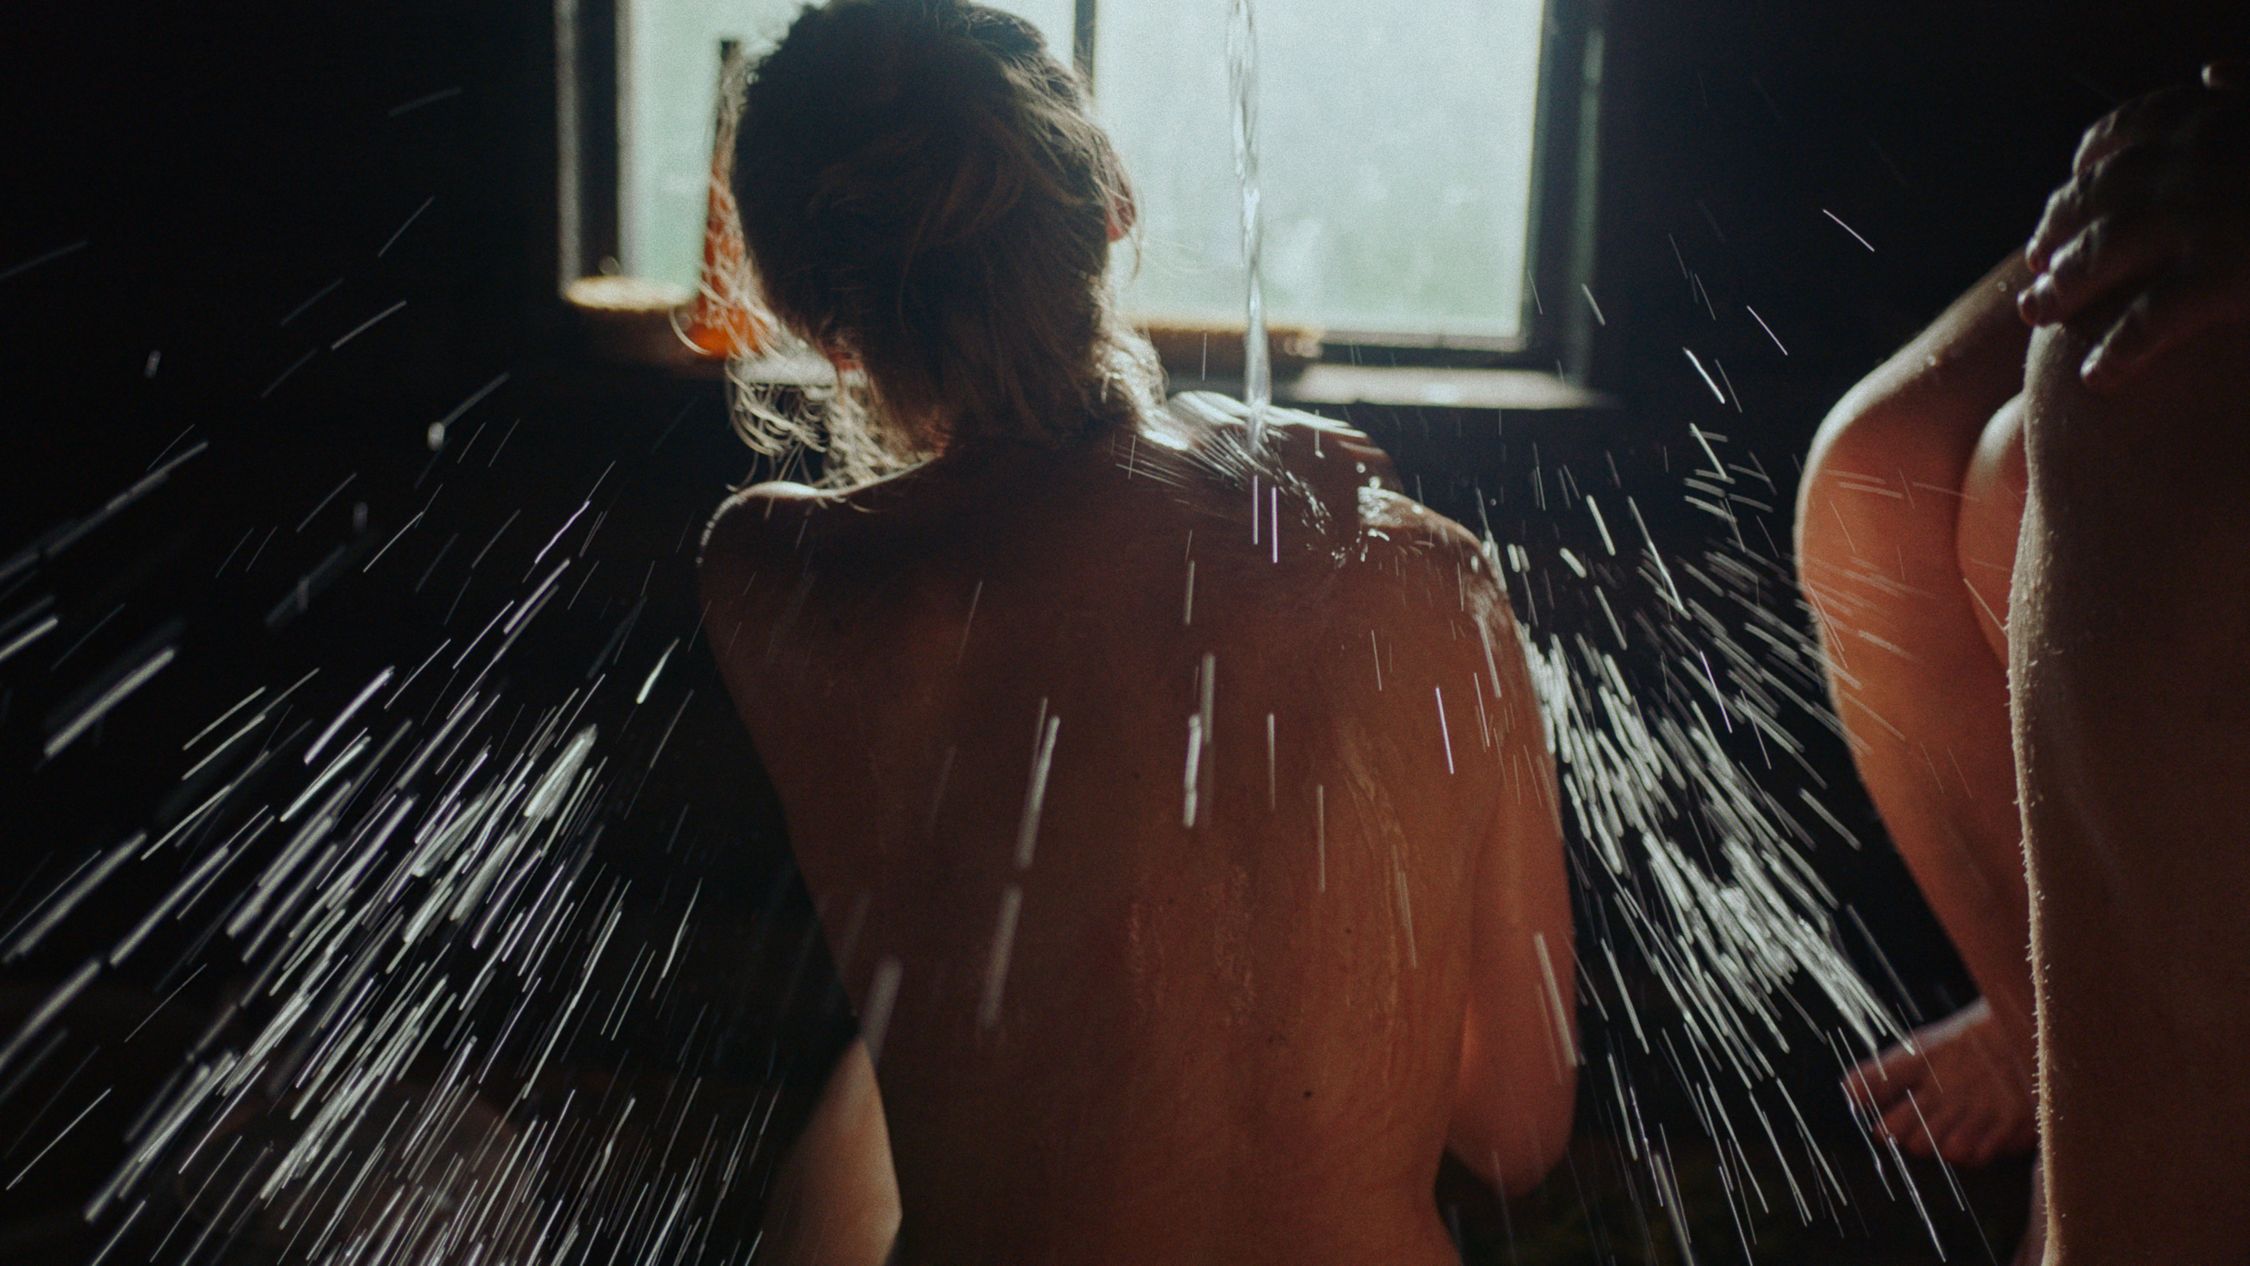 A close-up of a woman's back in a sauna, with water droplets cascading down their skin in a spray of light against a dark background. Sunlight filters through a window, highlighting the water's motion and creating a contrast with the shadows in the room. The focus on the water droplets gives the scene a dynamic and intimate quality.